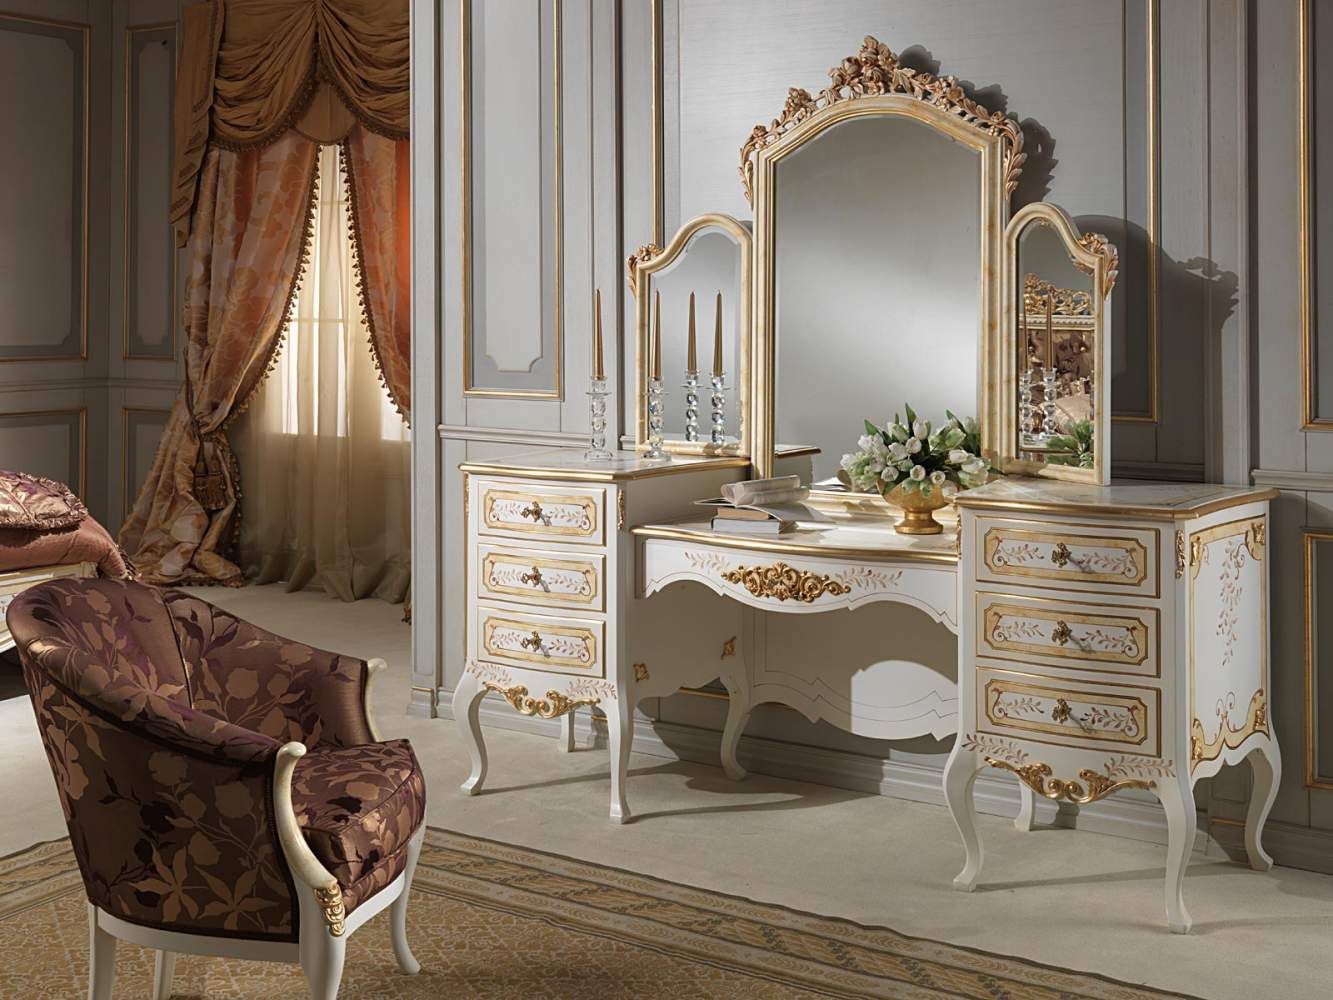 Classic Louvre bedroom, dressing table with mirror